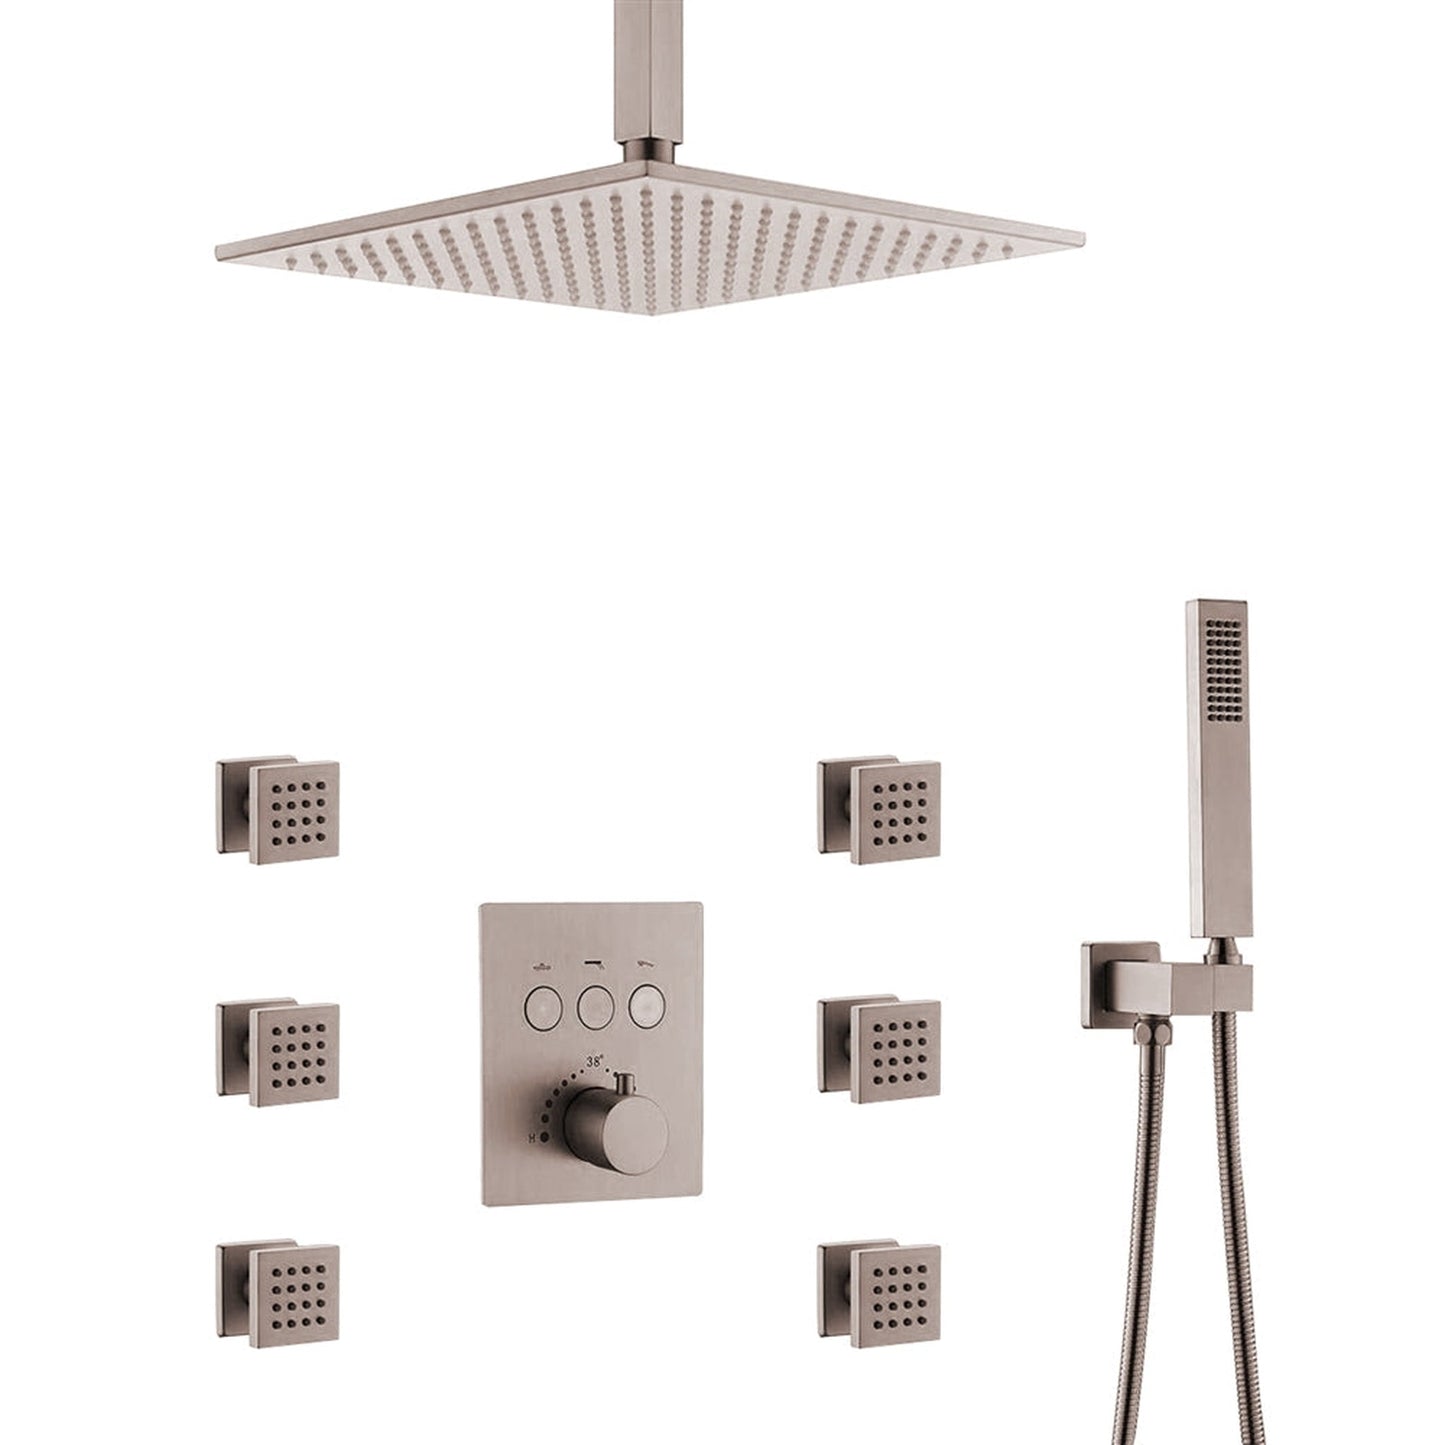 Fontana 20" Brushed Nickel Square Ceiling Mounted Rainfall Thermostat Mixer Shower System With 4-Jet Sprays and Hand Shower